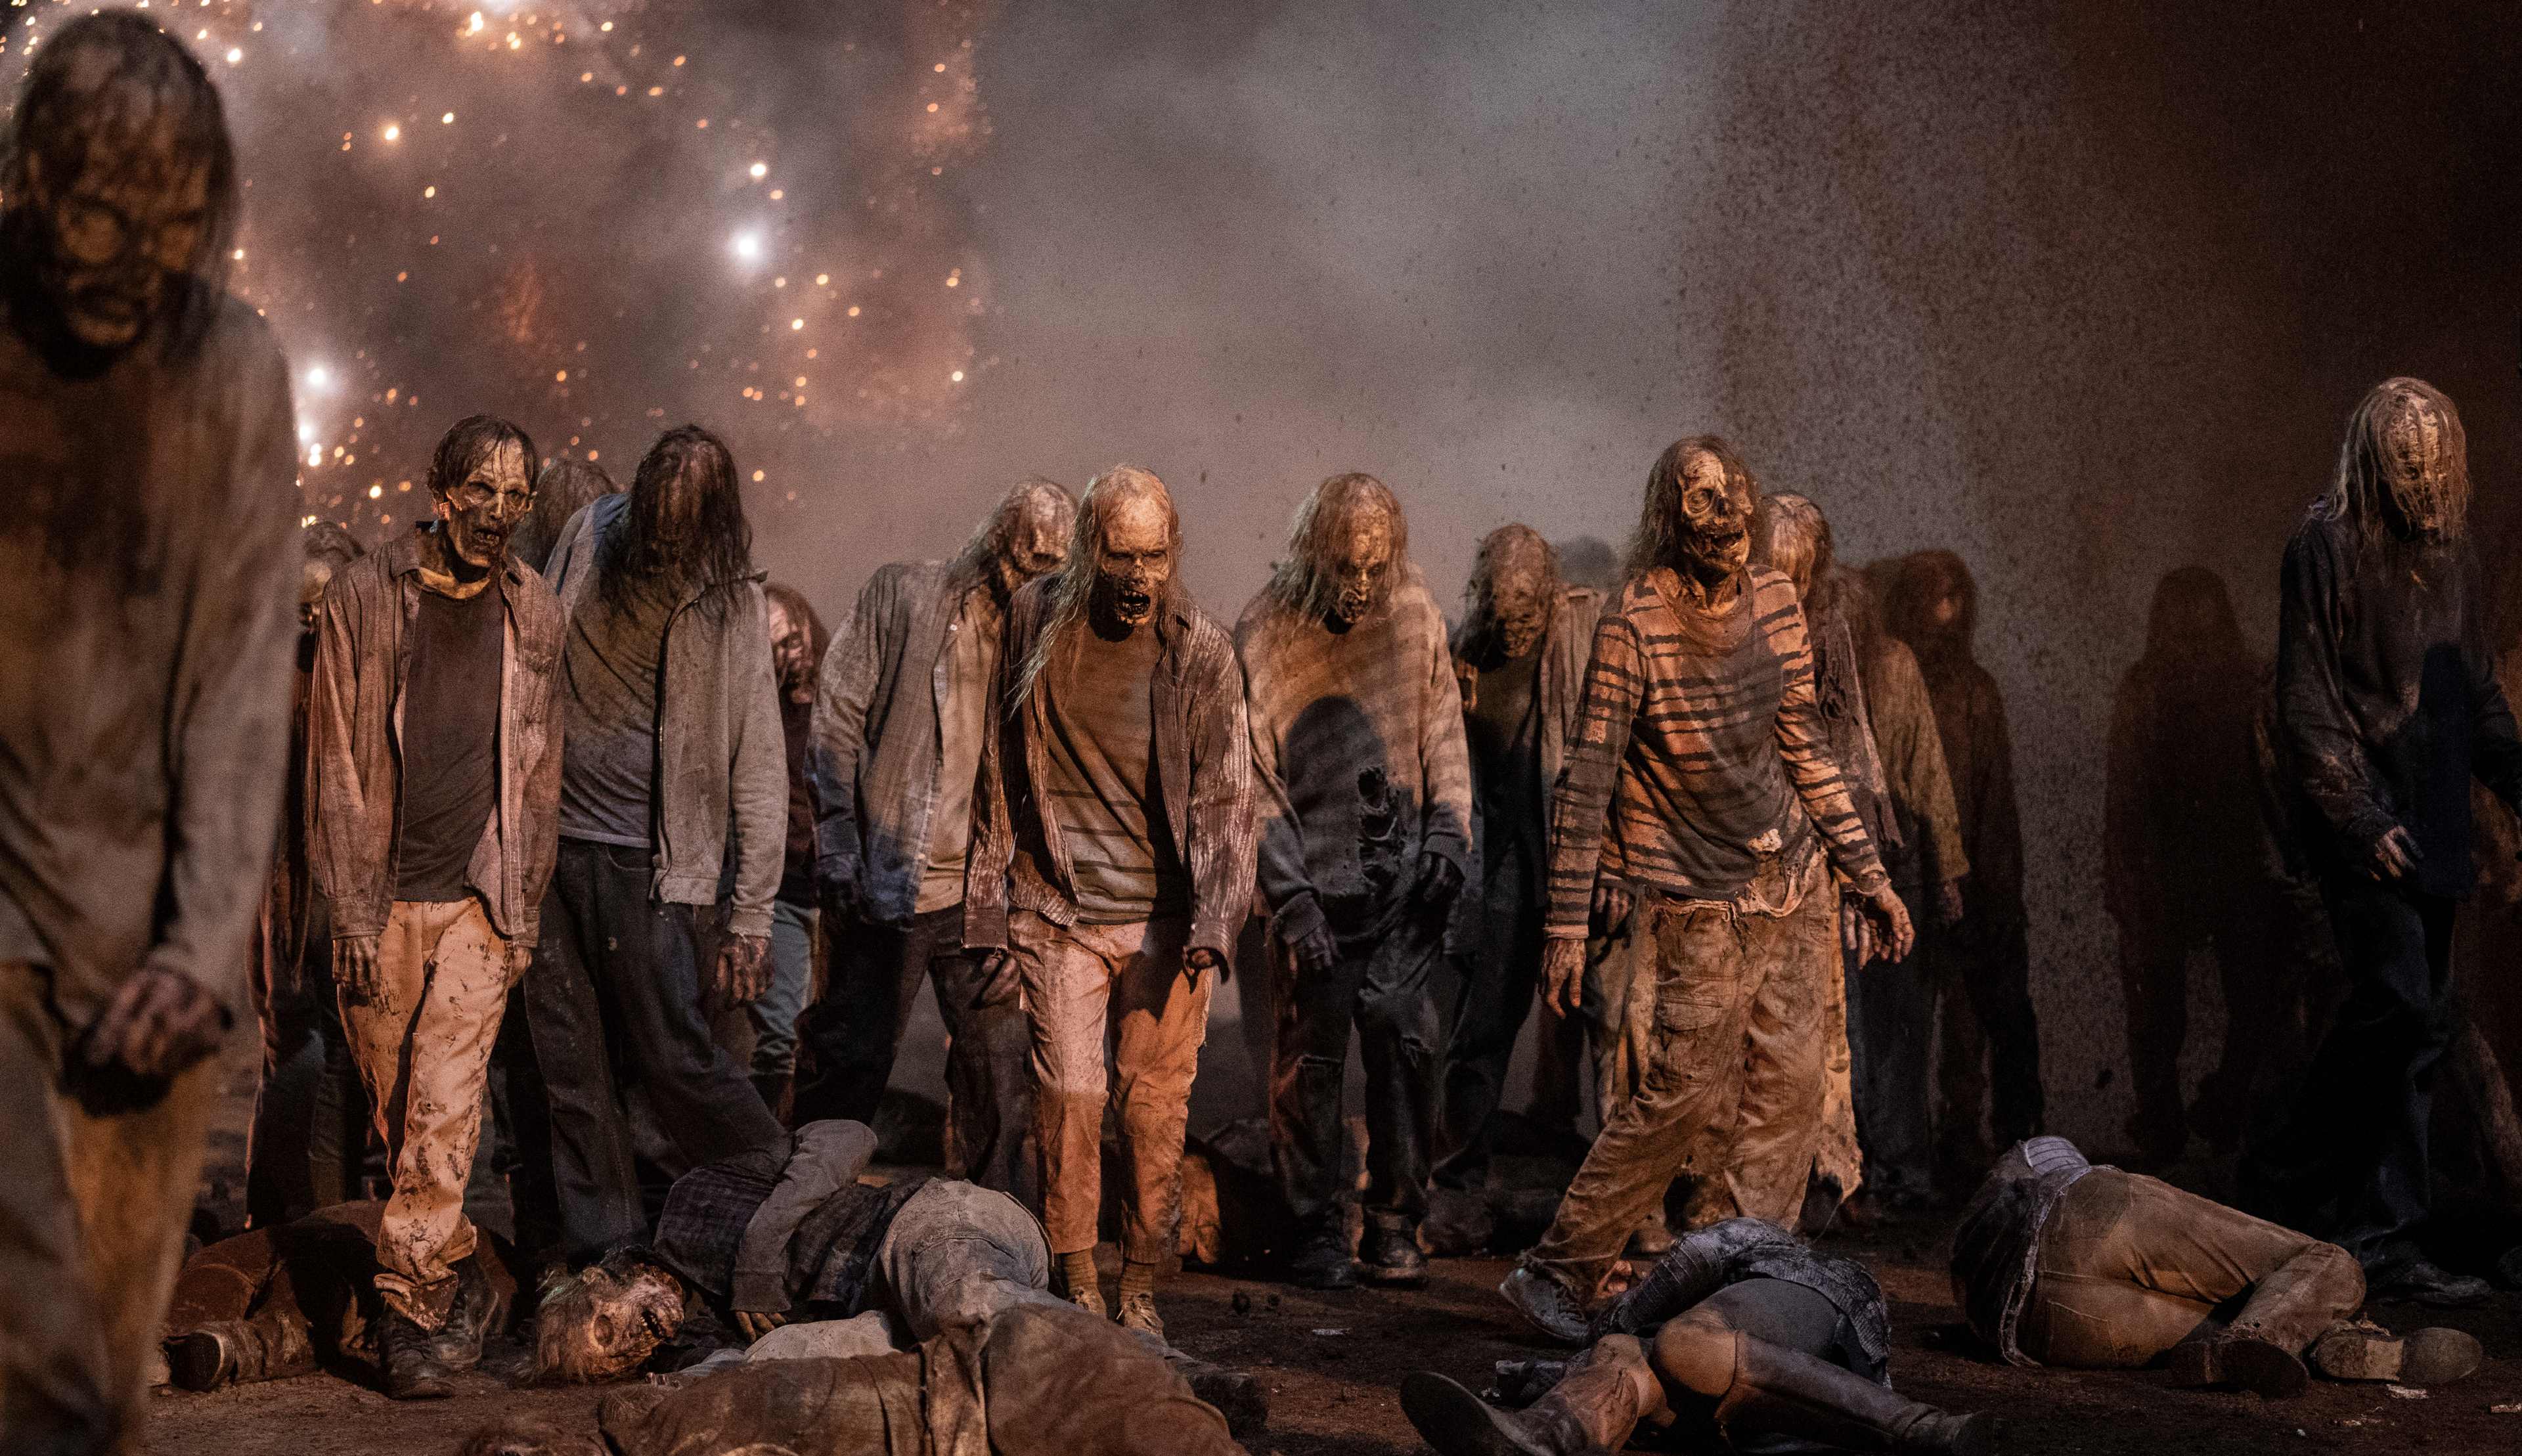 The Walking Dead Season 11 Census: Alive, Dead, or Zombie? (UPDATED)